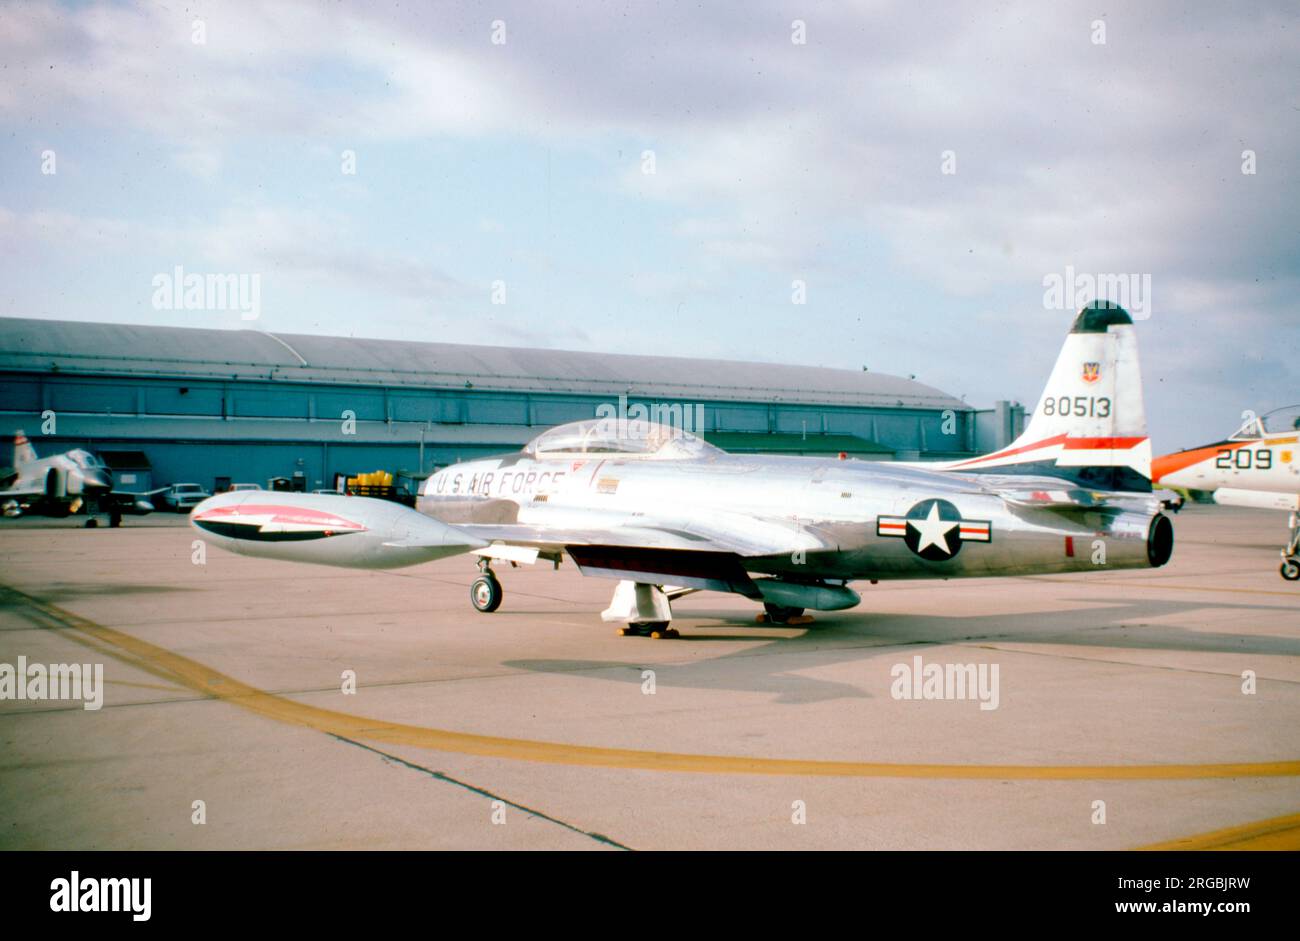 United States Air Force (USAF) - Lockheed T-33A-5-lo 58-0513 (msn 580-1482), del 84th Fighter Interceptor Training Squadron a Castle AFB, California. Foto Stock